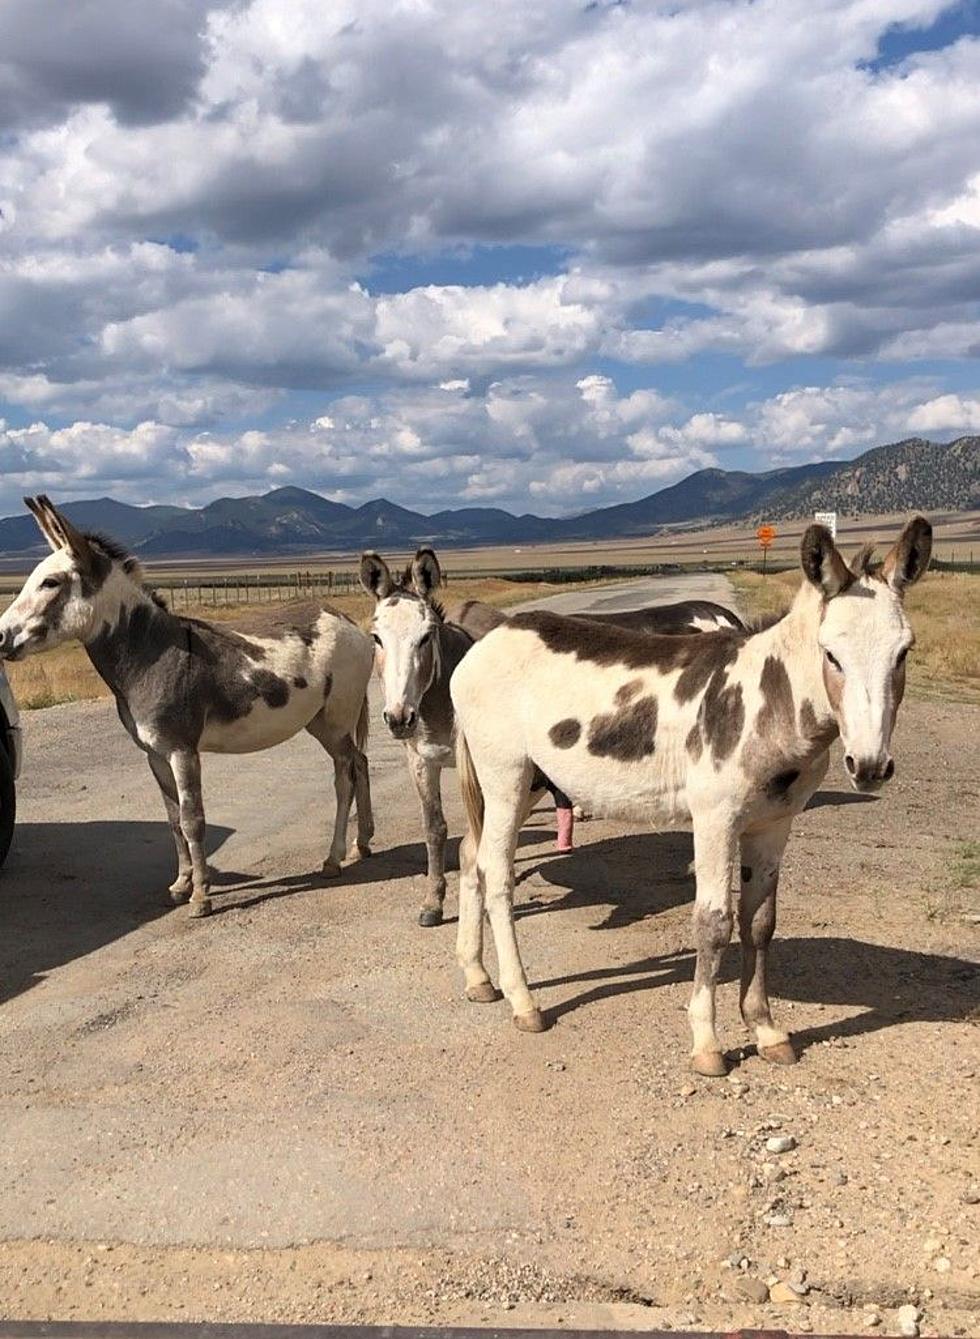 Wild Burros Are Being Used to Protect Livestock in Colorado